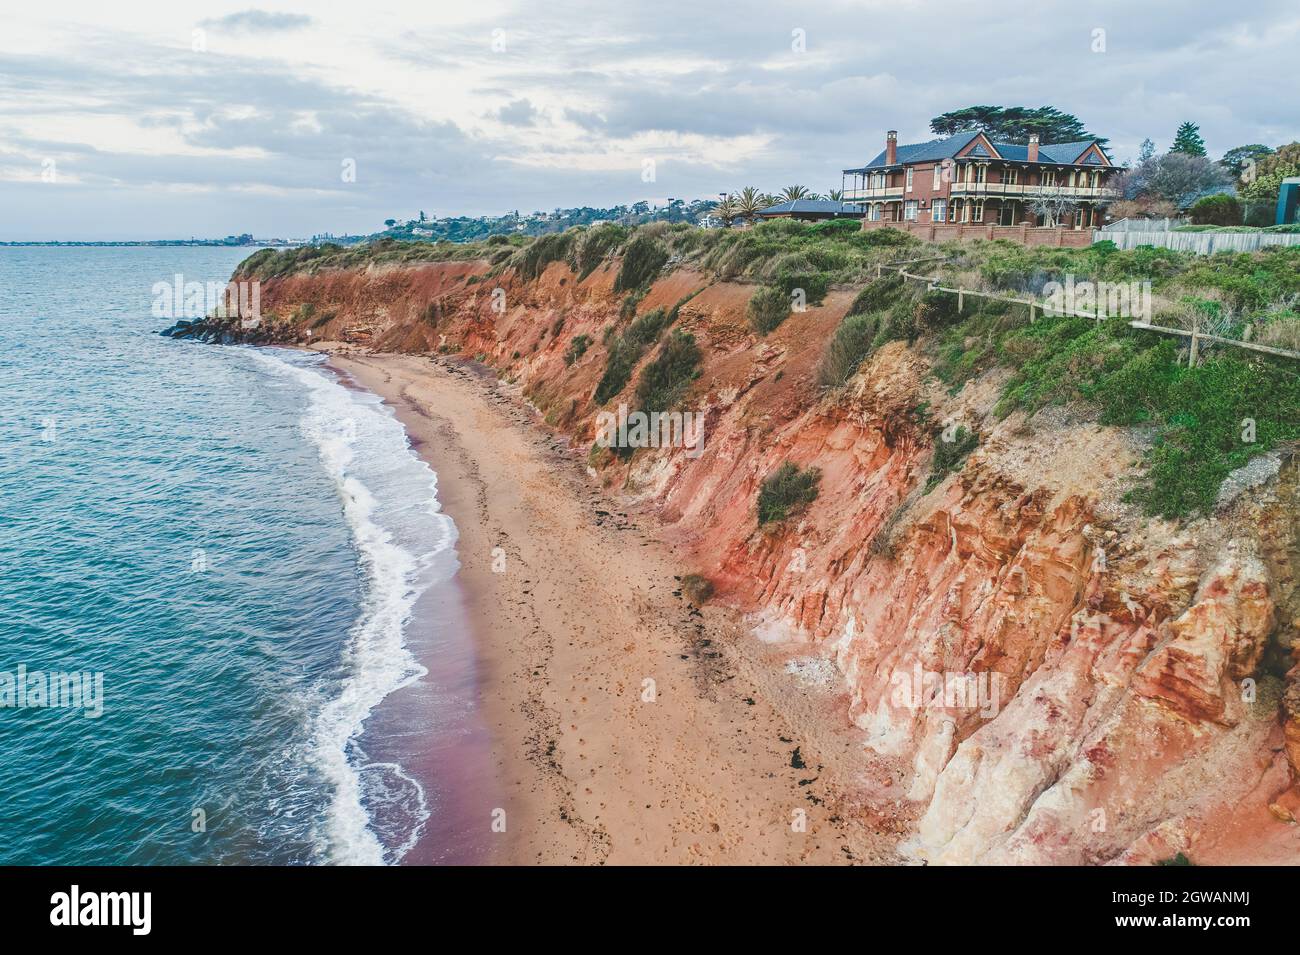 House On A Cliff Above Ocean In Australia - Aerial View Stock Photo